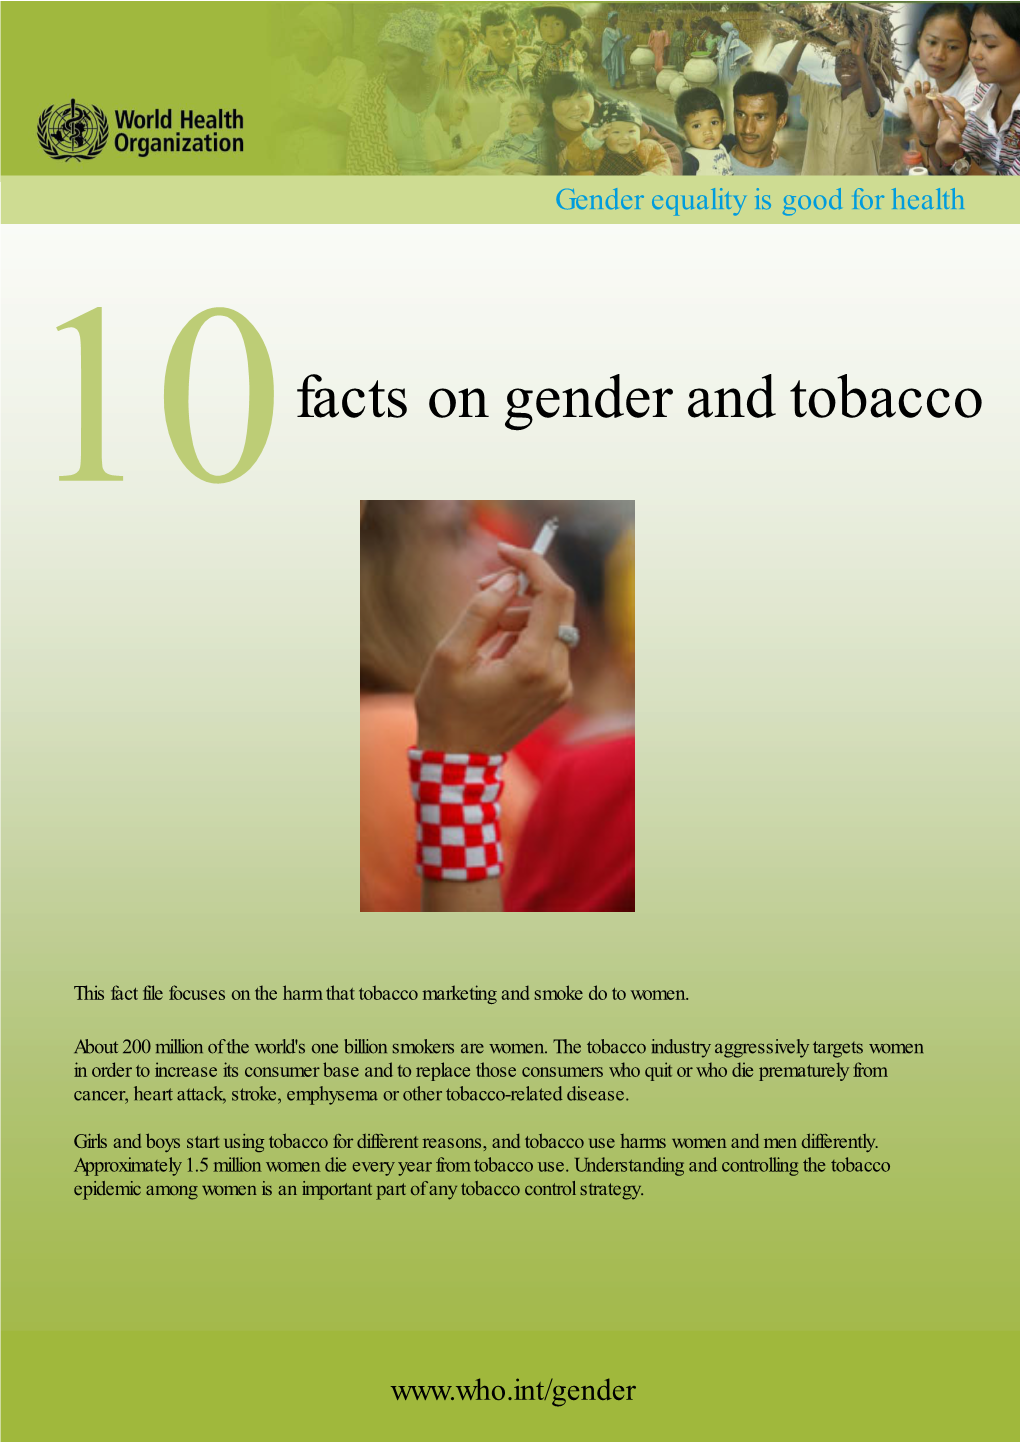 Facts on Gender and Tobacco